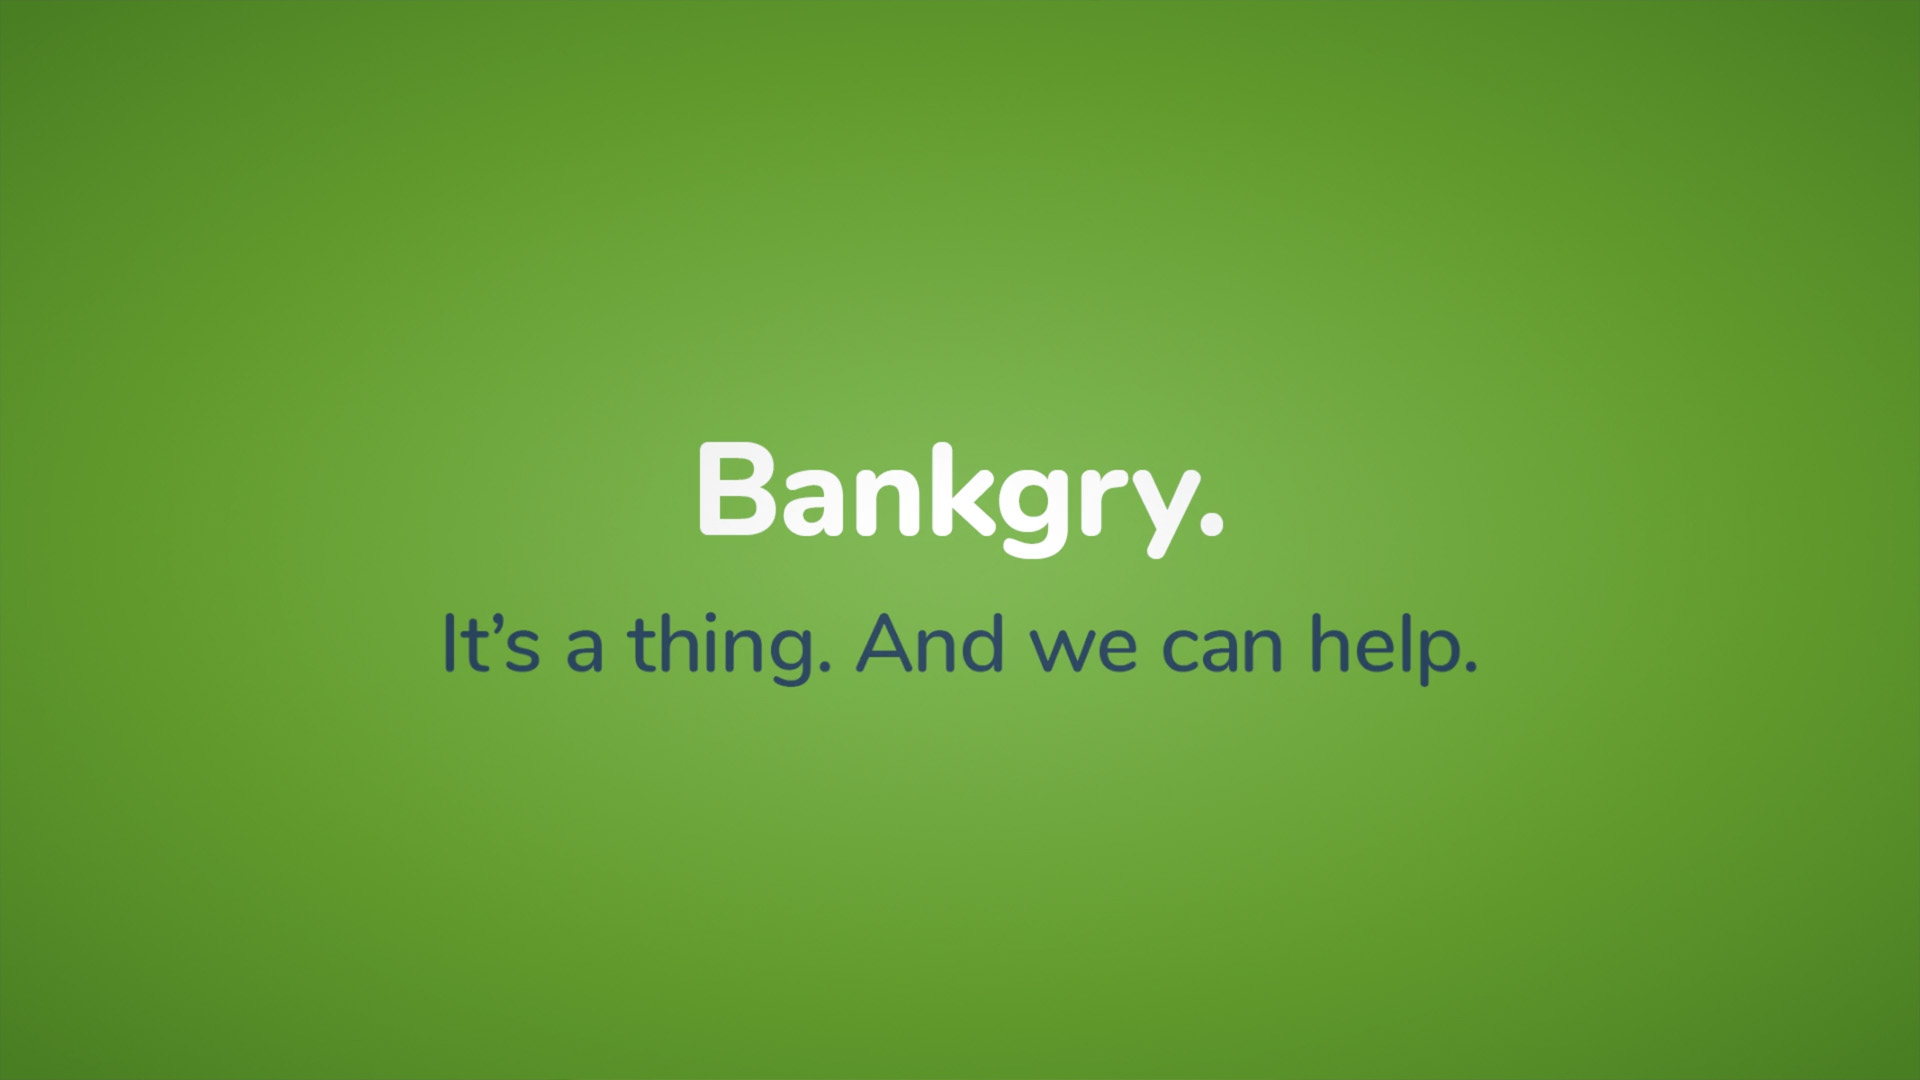 Innovation Federal Credit Union, Video, Bankgry, It's a Thing, Portfolio Image, Bankgry. It's a thing. And we can help.